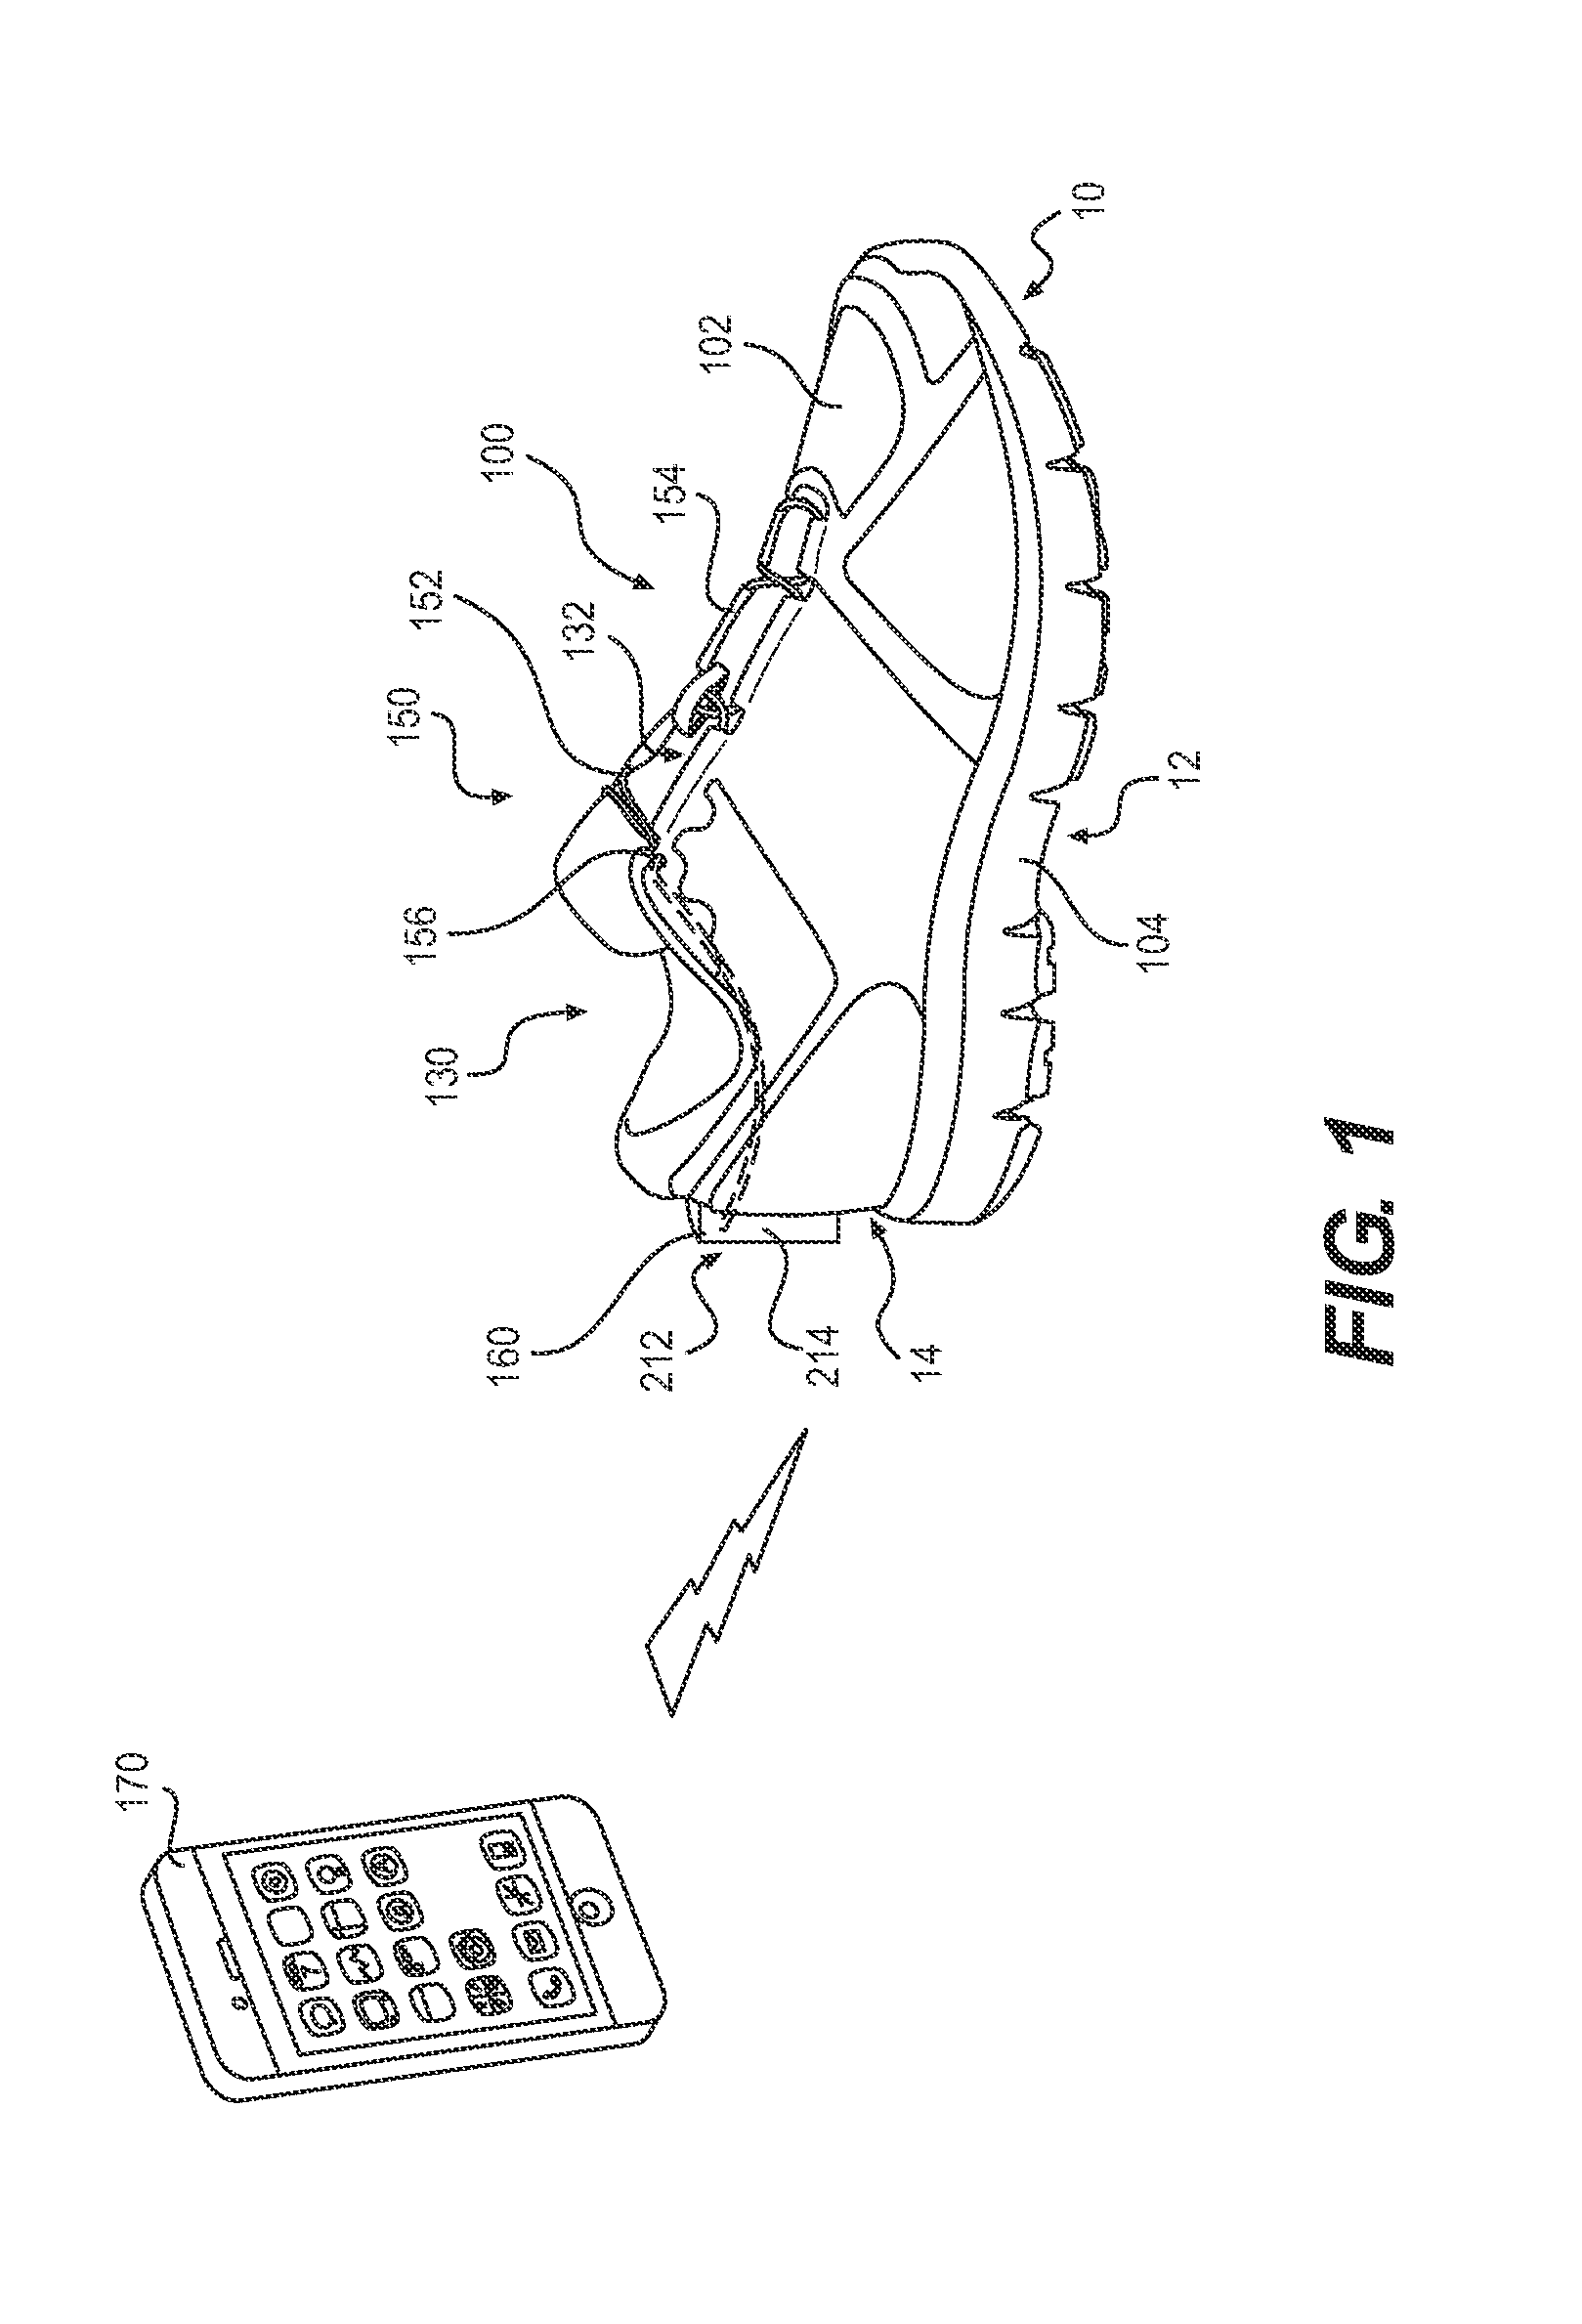 Motorized tensioning system for medical braces and devices